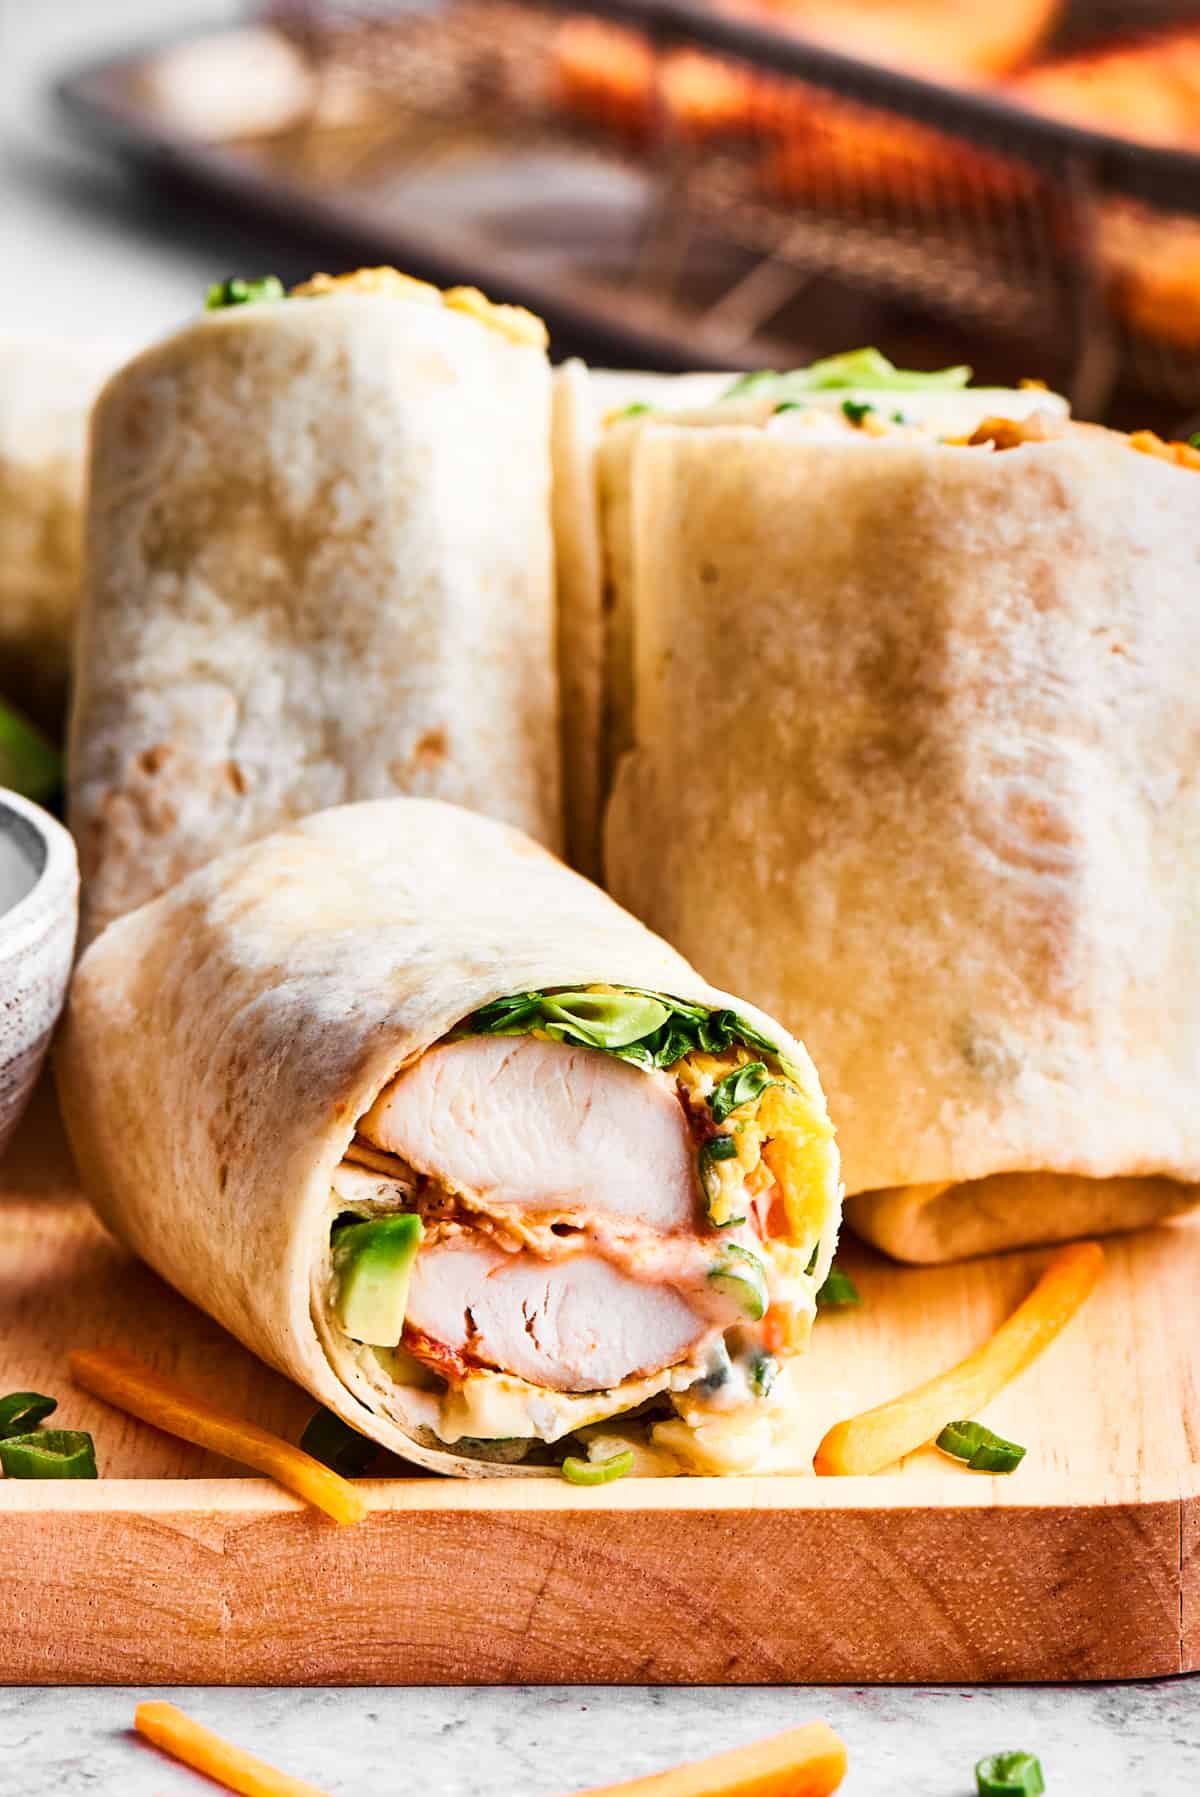 Sliced buffalo chicken wraps are displayed on a wooden cutting board with a bowl of ranch dressing nearby.